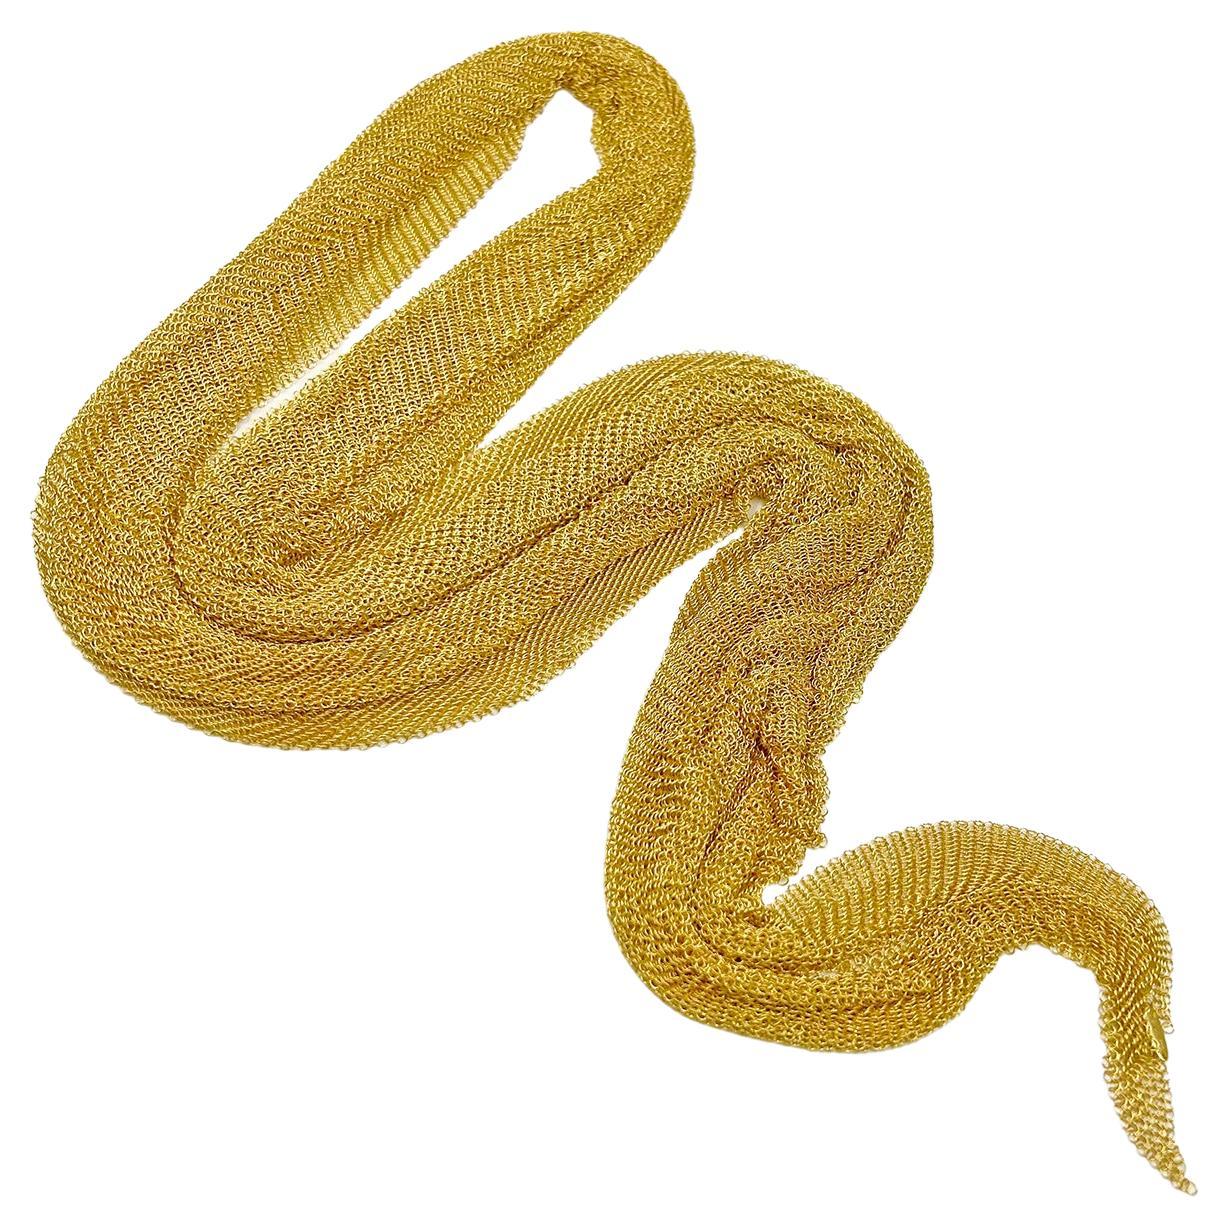 Elsa Peretti's original design scarf necklace for Tiffany & Co.  Mesh design crafted in 18k yellow gold and measuring 38